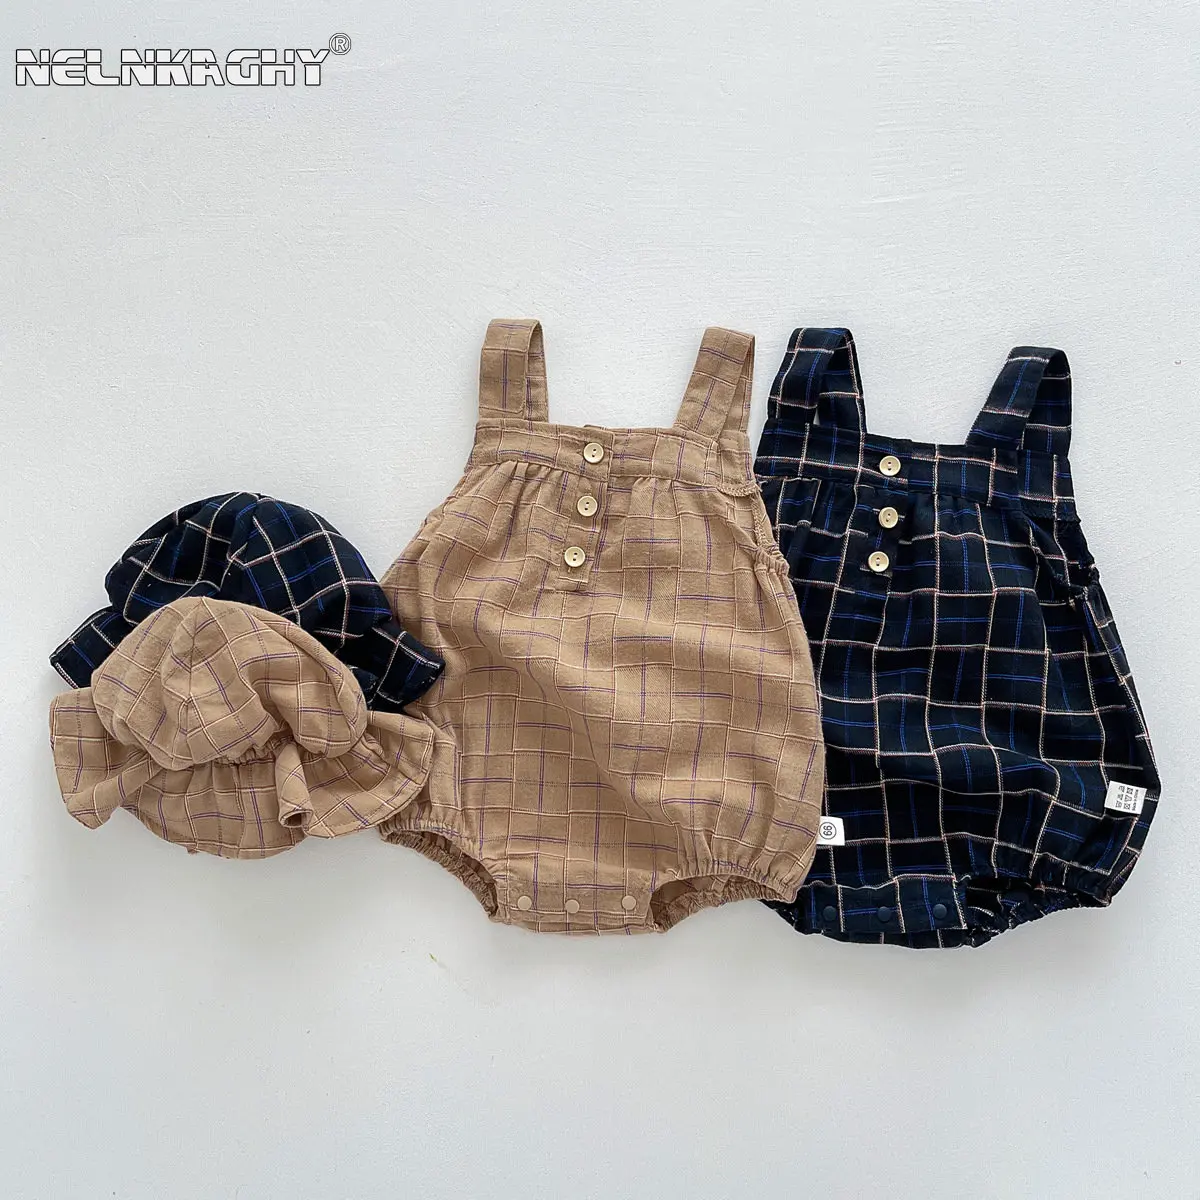 2023 Summer Collection: Sling Plaid Cotton Bodysuits+Fisherman Hat Set for Infant Newborn Girls Boys - Babay Comfy Outdoor Wear